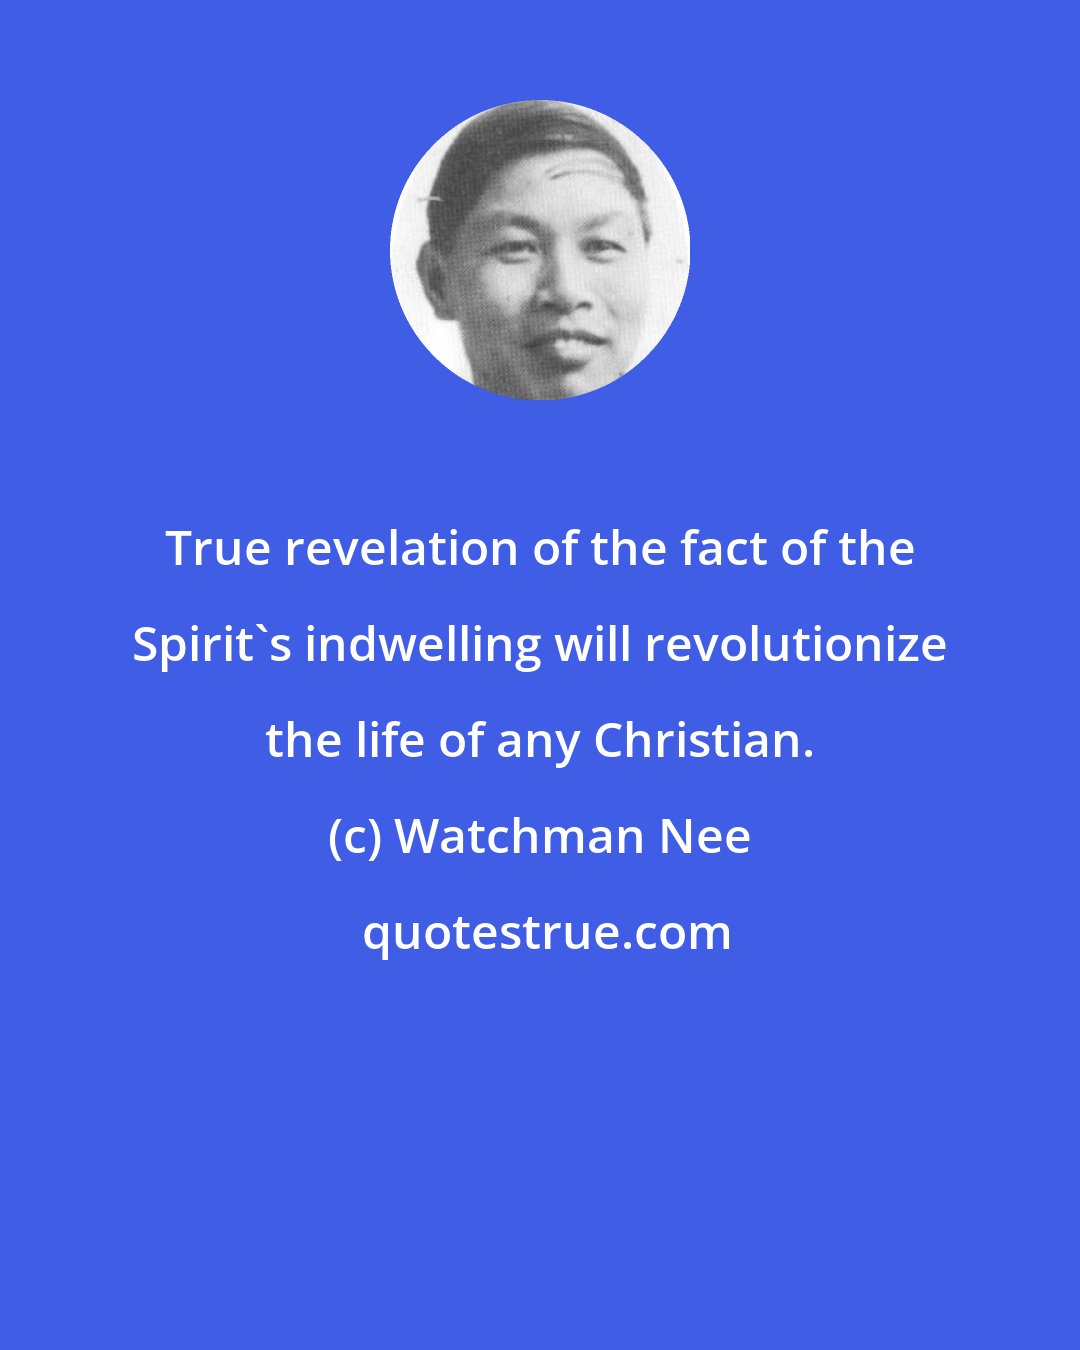 Watchman Nee: True revelation of the fact of the Spirit's indwelling will revolutionize the life of any Christian.